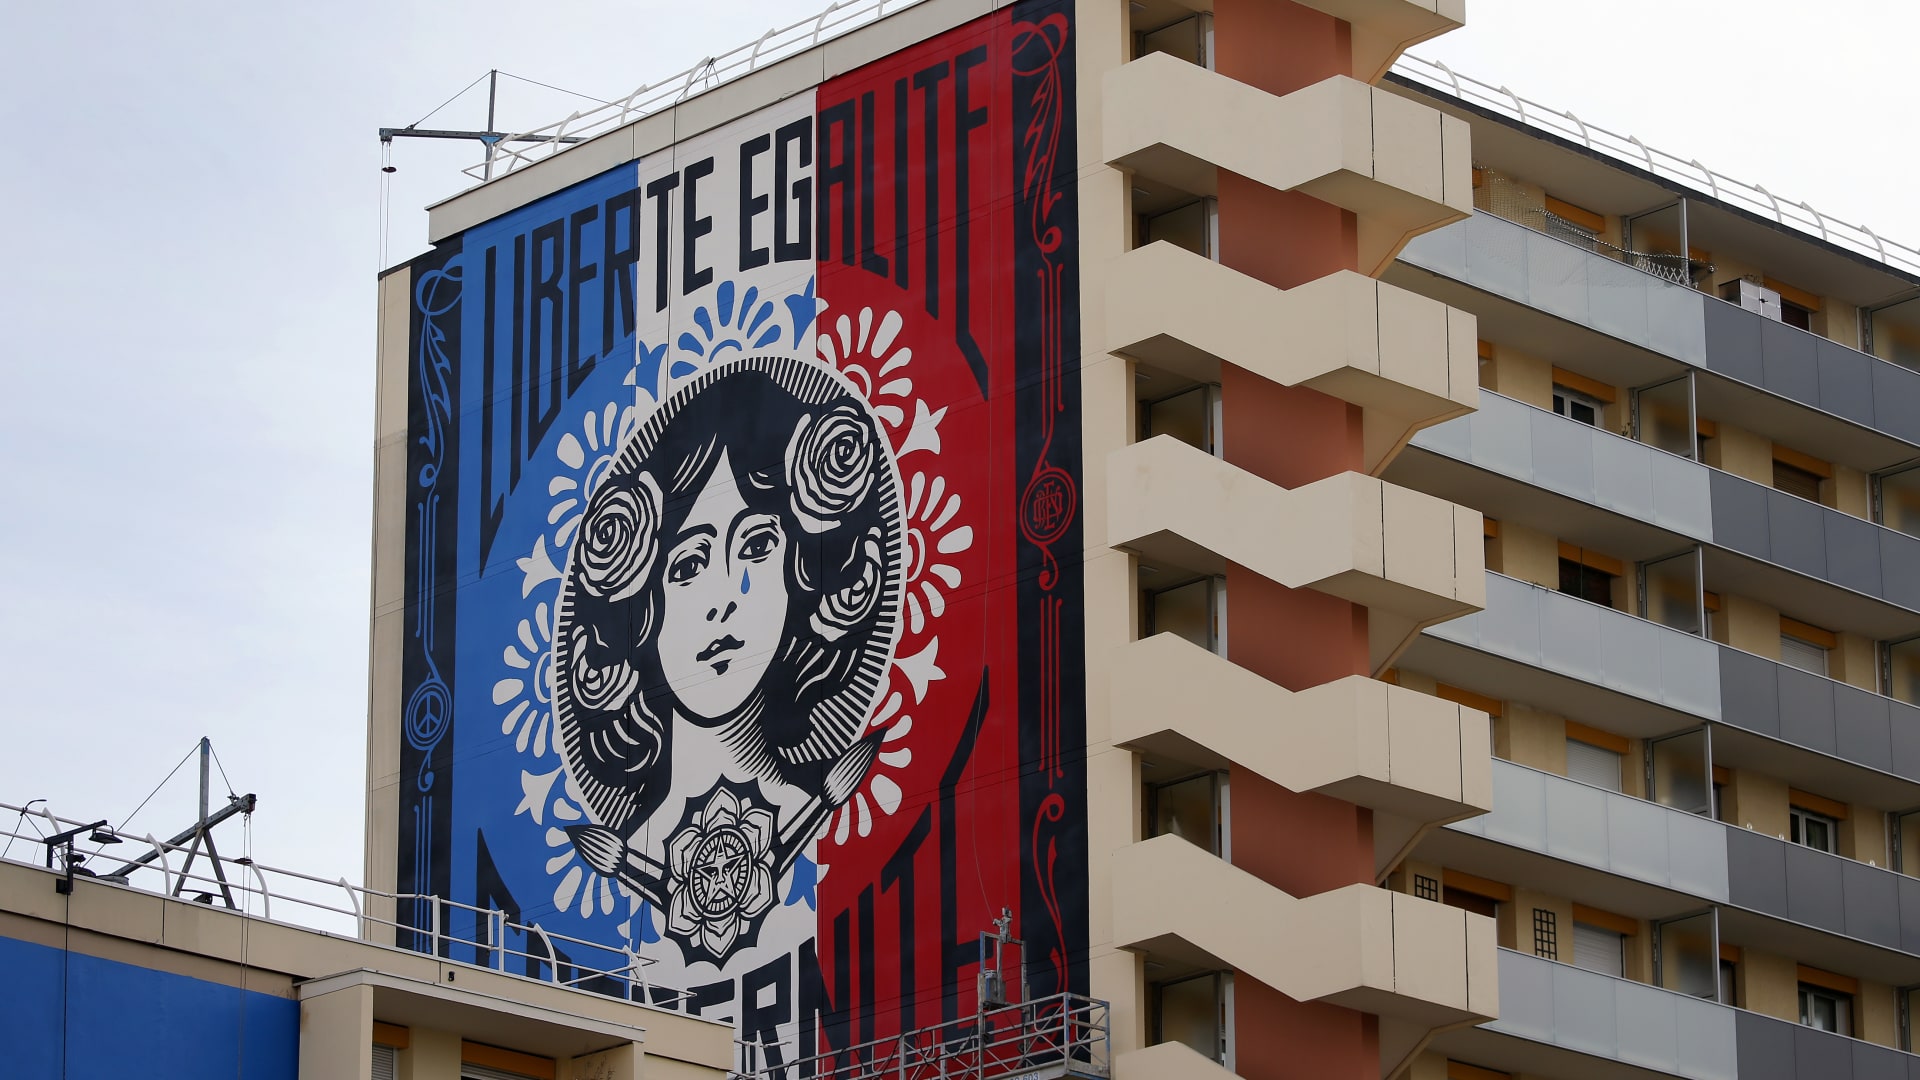 A large fresco by the American artist Shepard Fairey on the wall of a building in Paris, France. Sotheby's has a number of Fairey's prints for sale online as part of its 'collection starters' range.